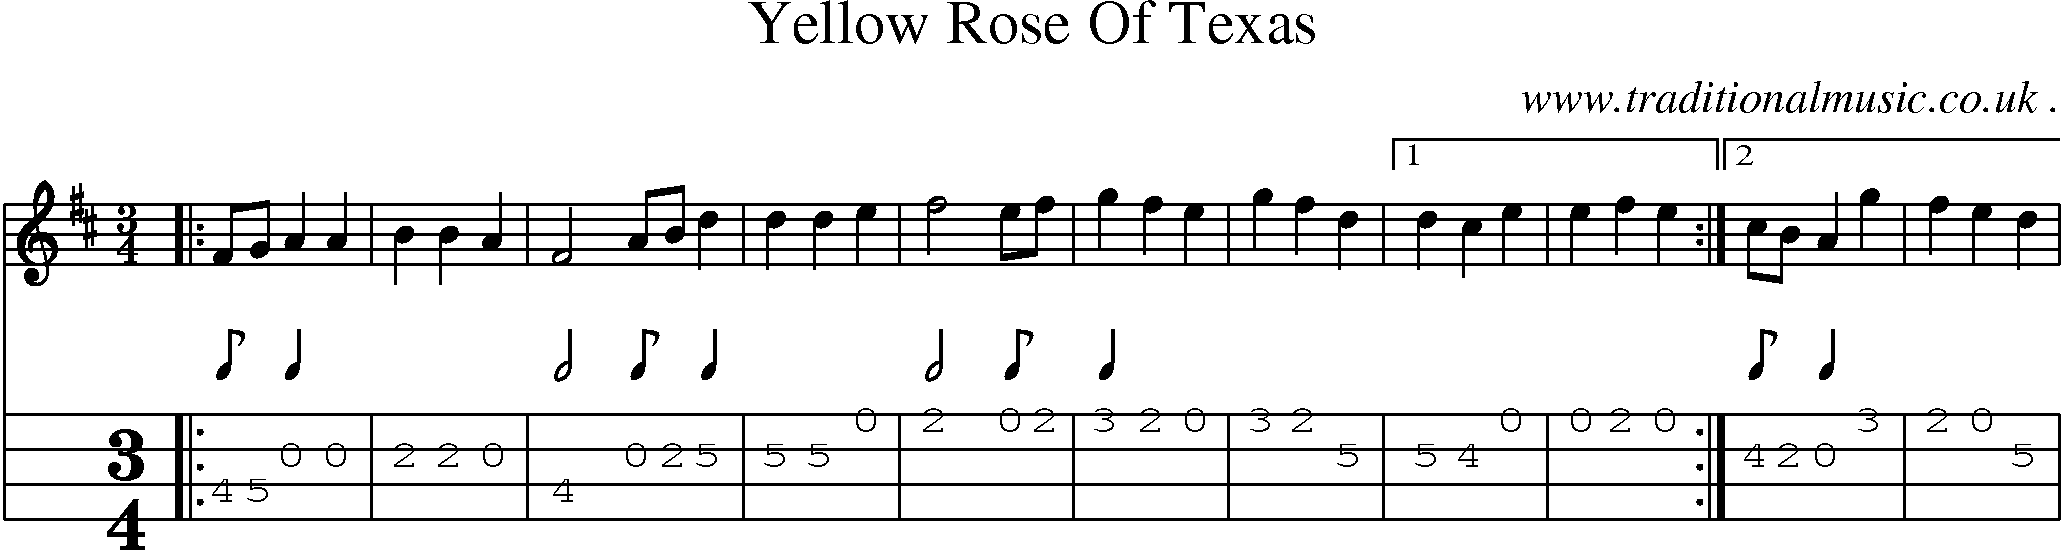 Music Score and Guitar Tabs for Yellow Rose Of Texas